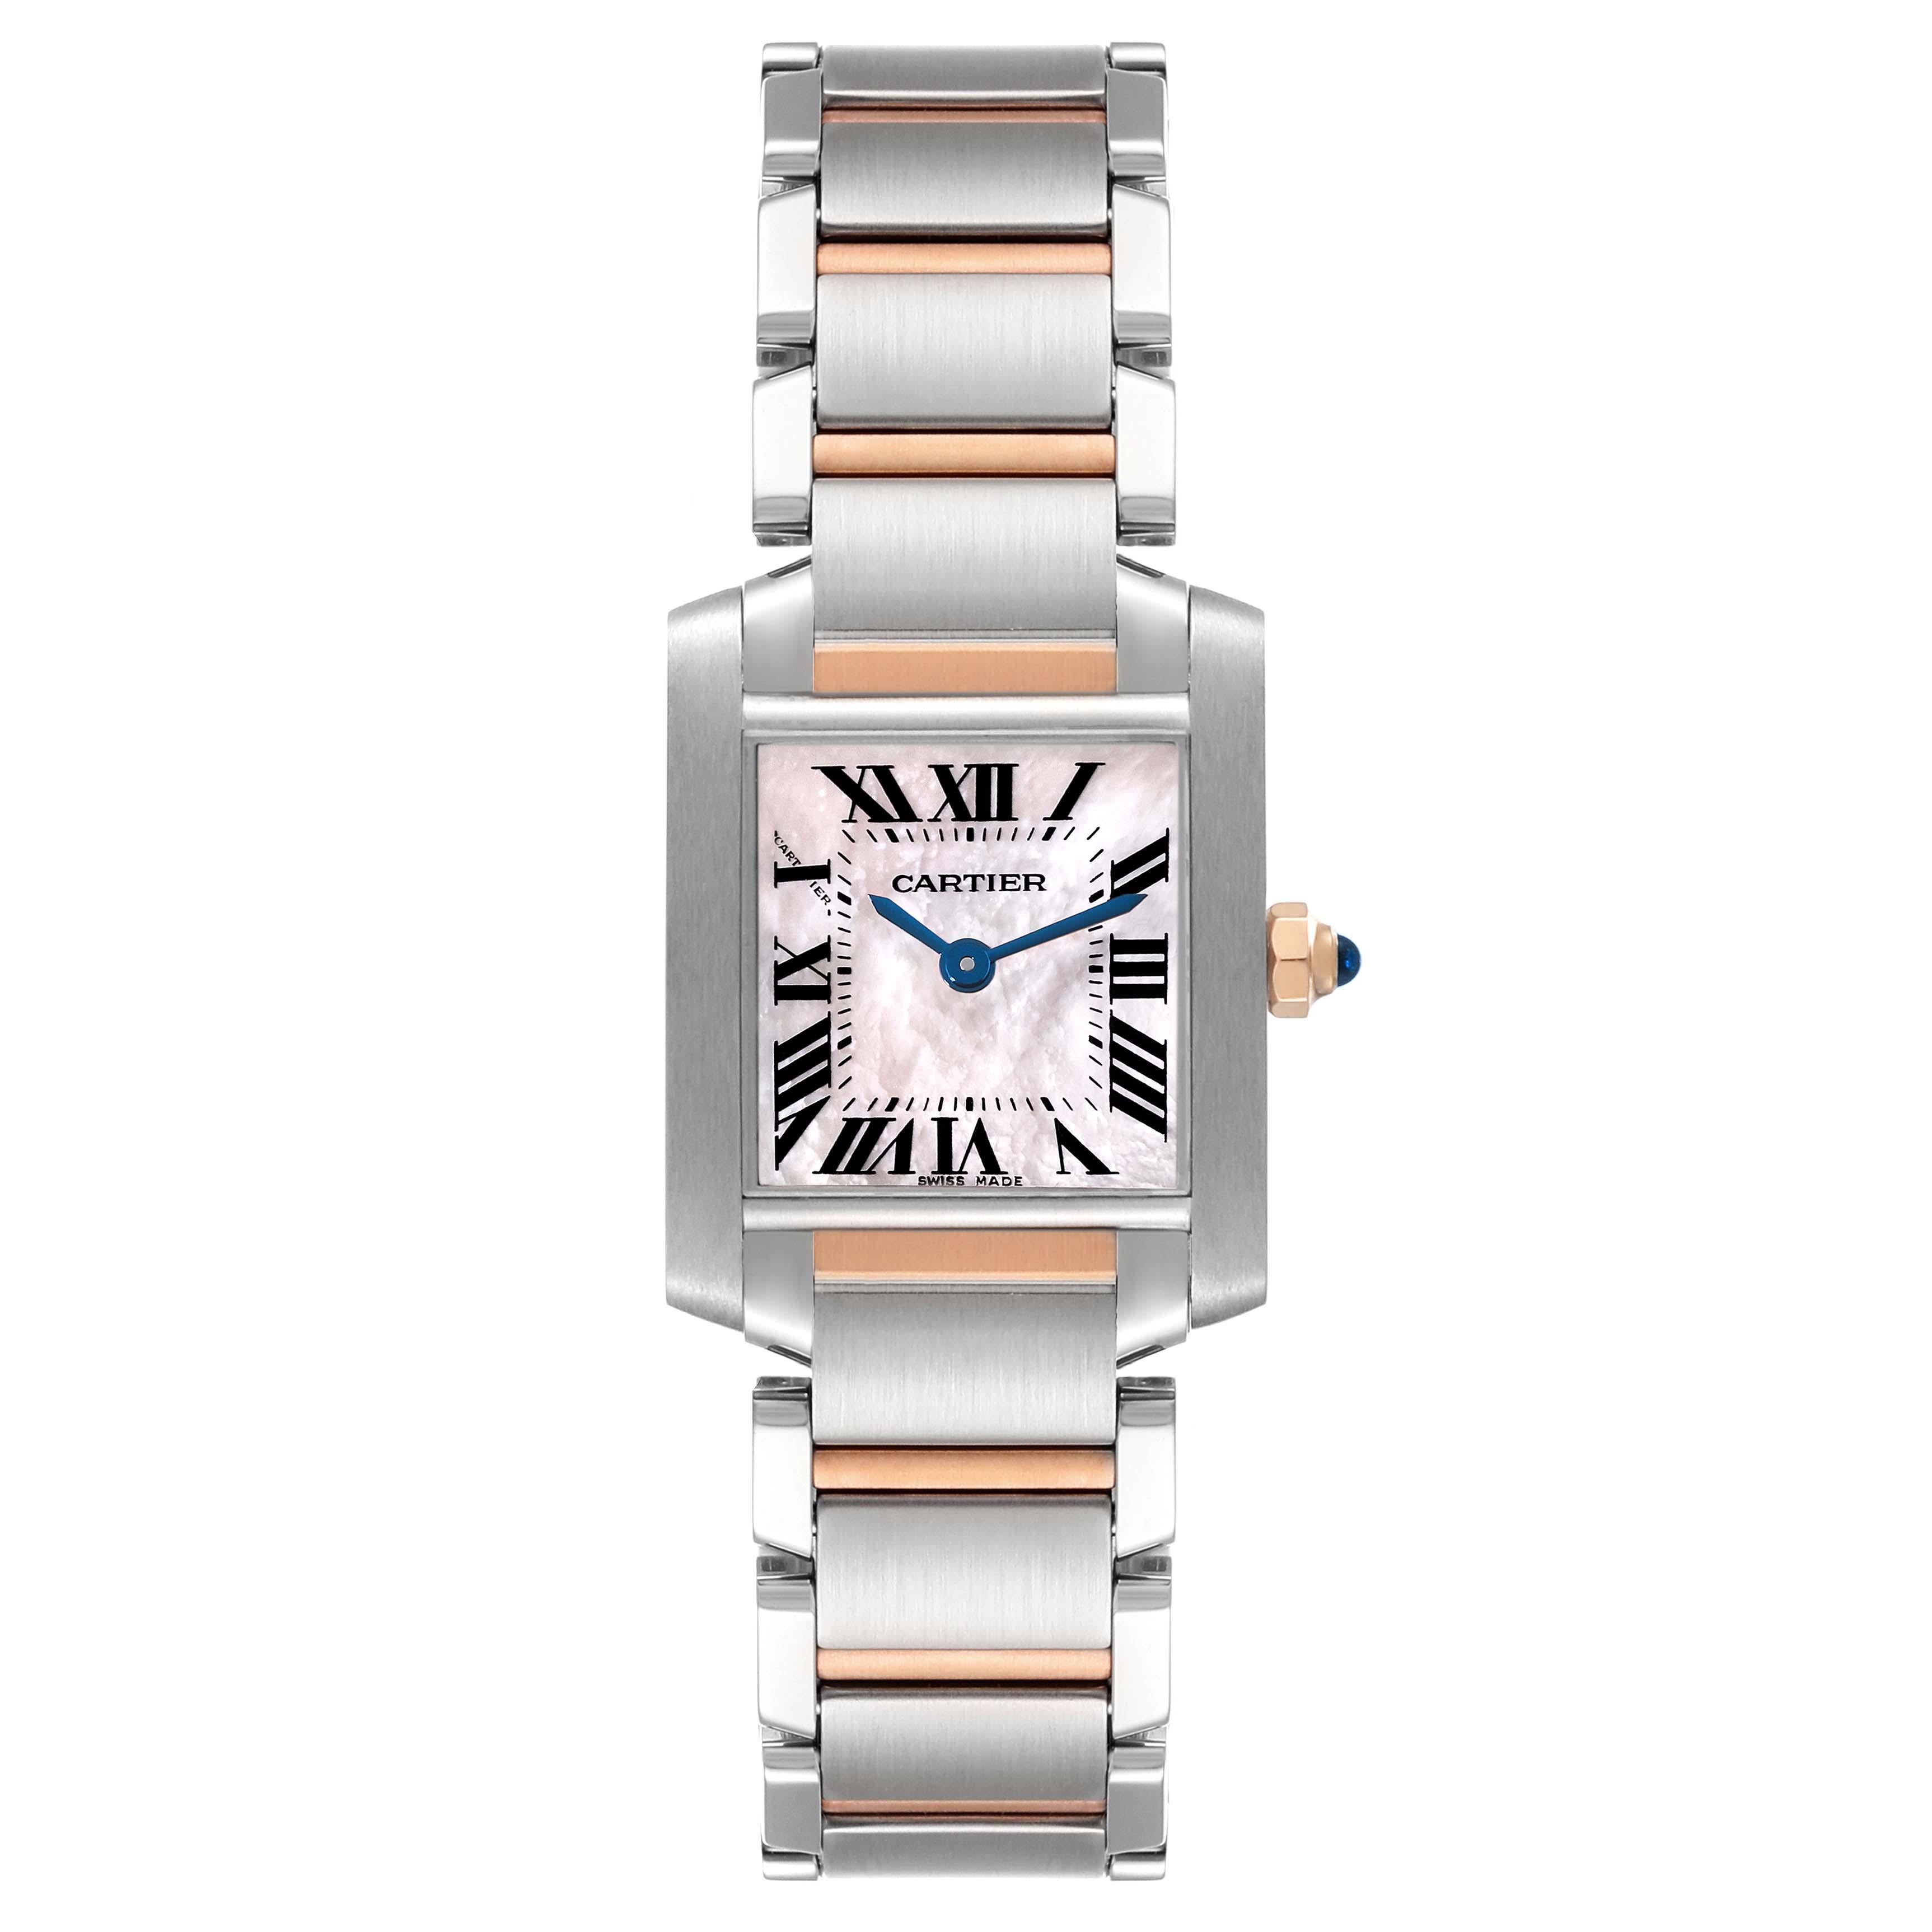 Cartier Tank Francaise Steel Rose Gold MOP Ladies Watch W51027Q4. Quartz movement. Rectangular stainless steel 20.0 x 25.0 mm case. Octagonal 18k rose gold crown set with a blue spinel cabochon. . Scratch resistant sapphire crystal. Pink mother of